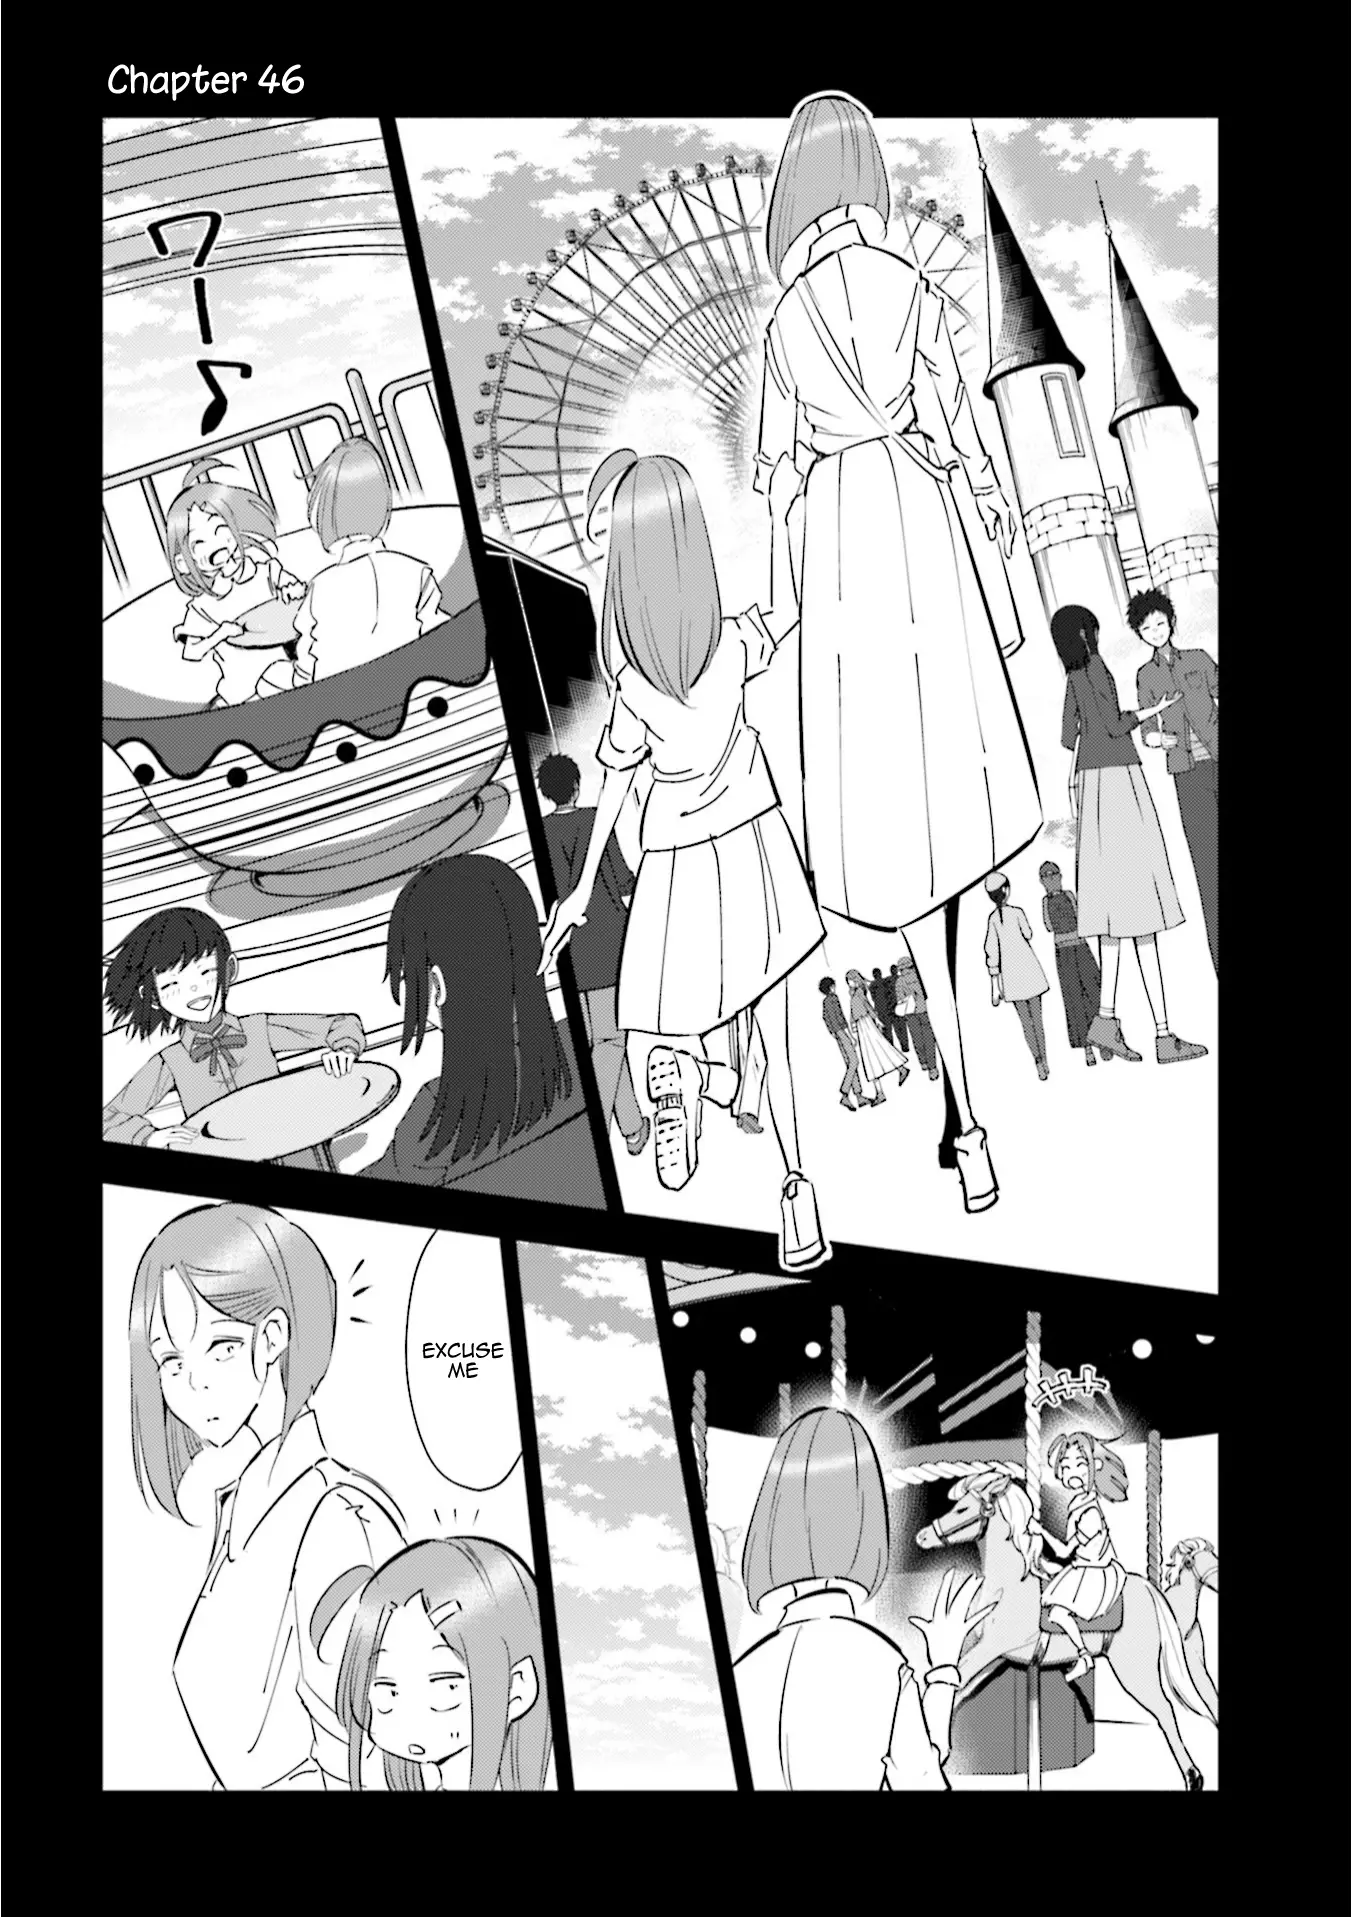 If My Wife Became An Elementary School Student - 46 page 3-10943c18